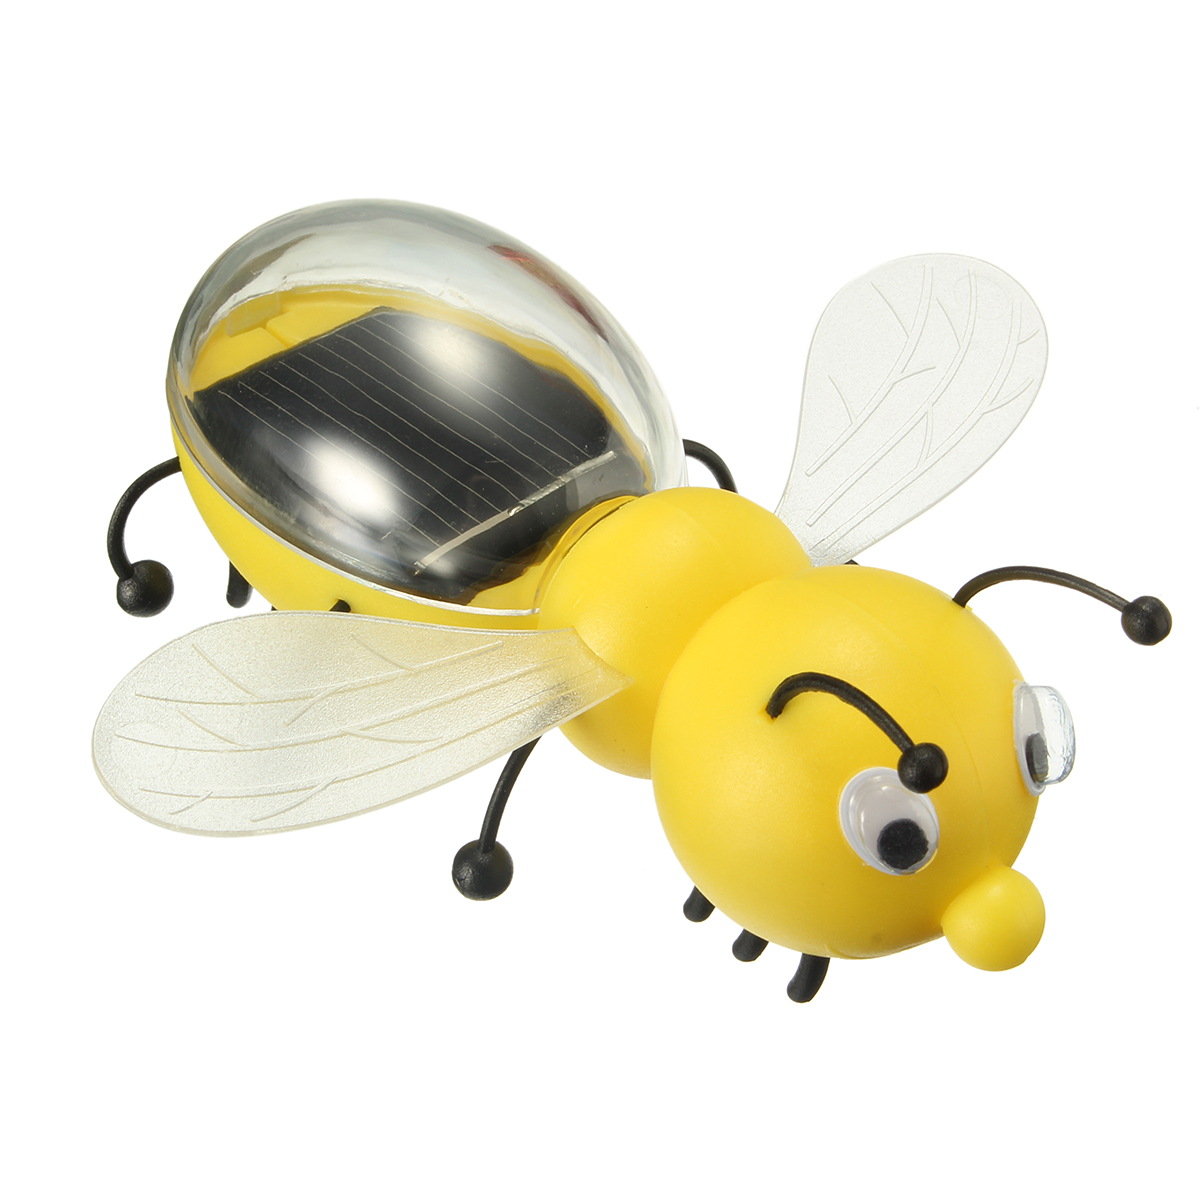 Educational-Solar-Powered-Bee-Ant-Robot-Toy-Gadget-Gift-1965213-1